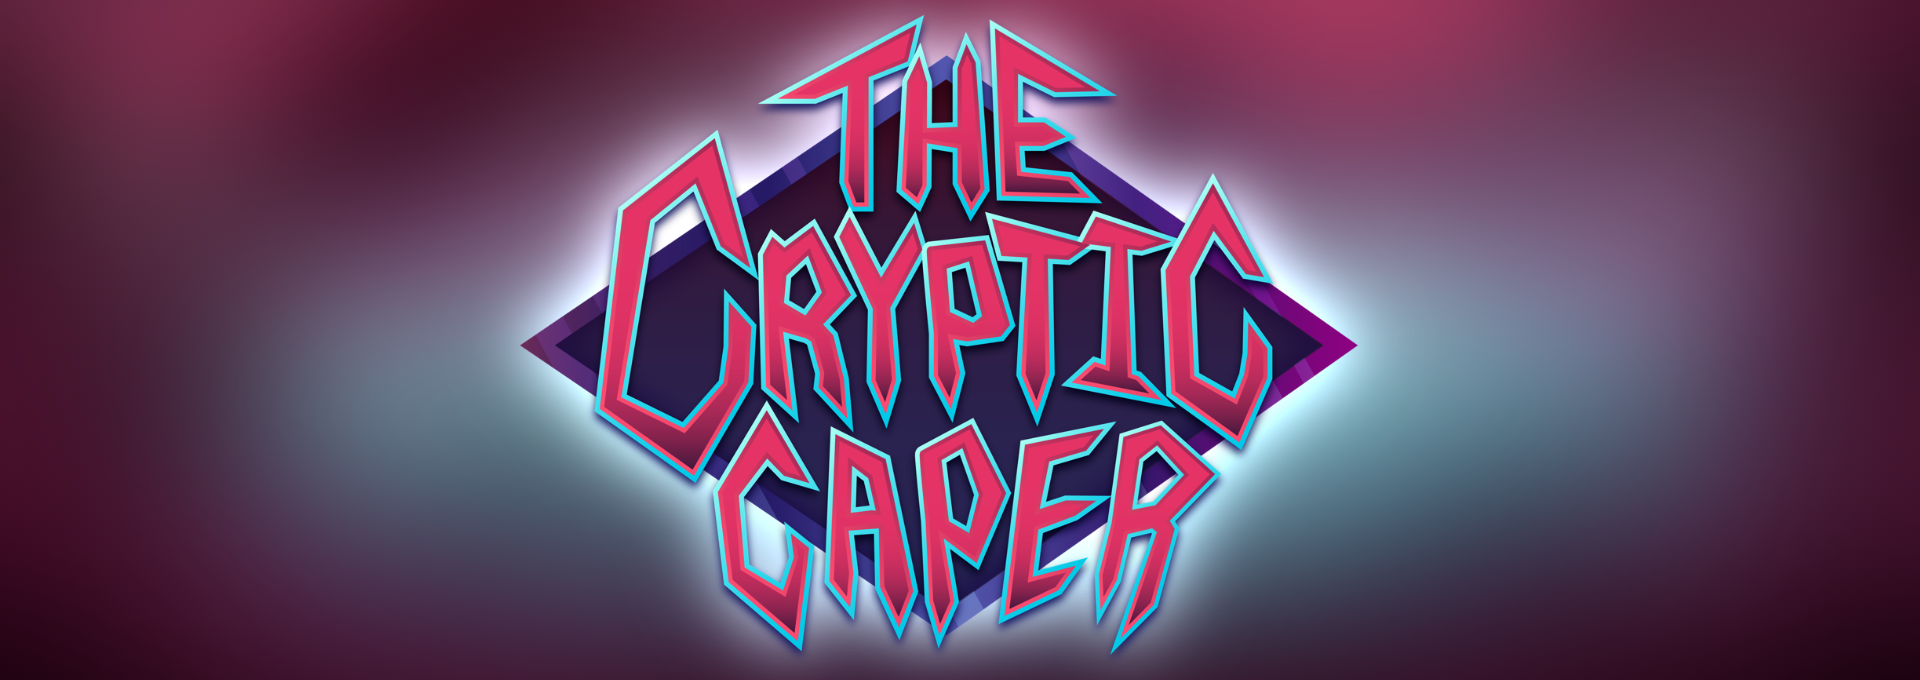 The Cryptic Caper